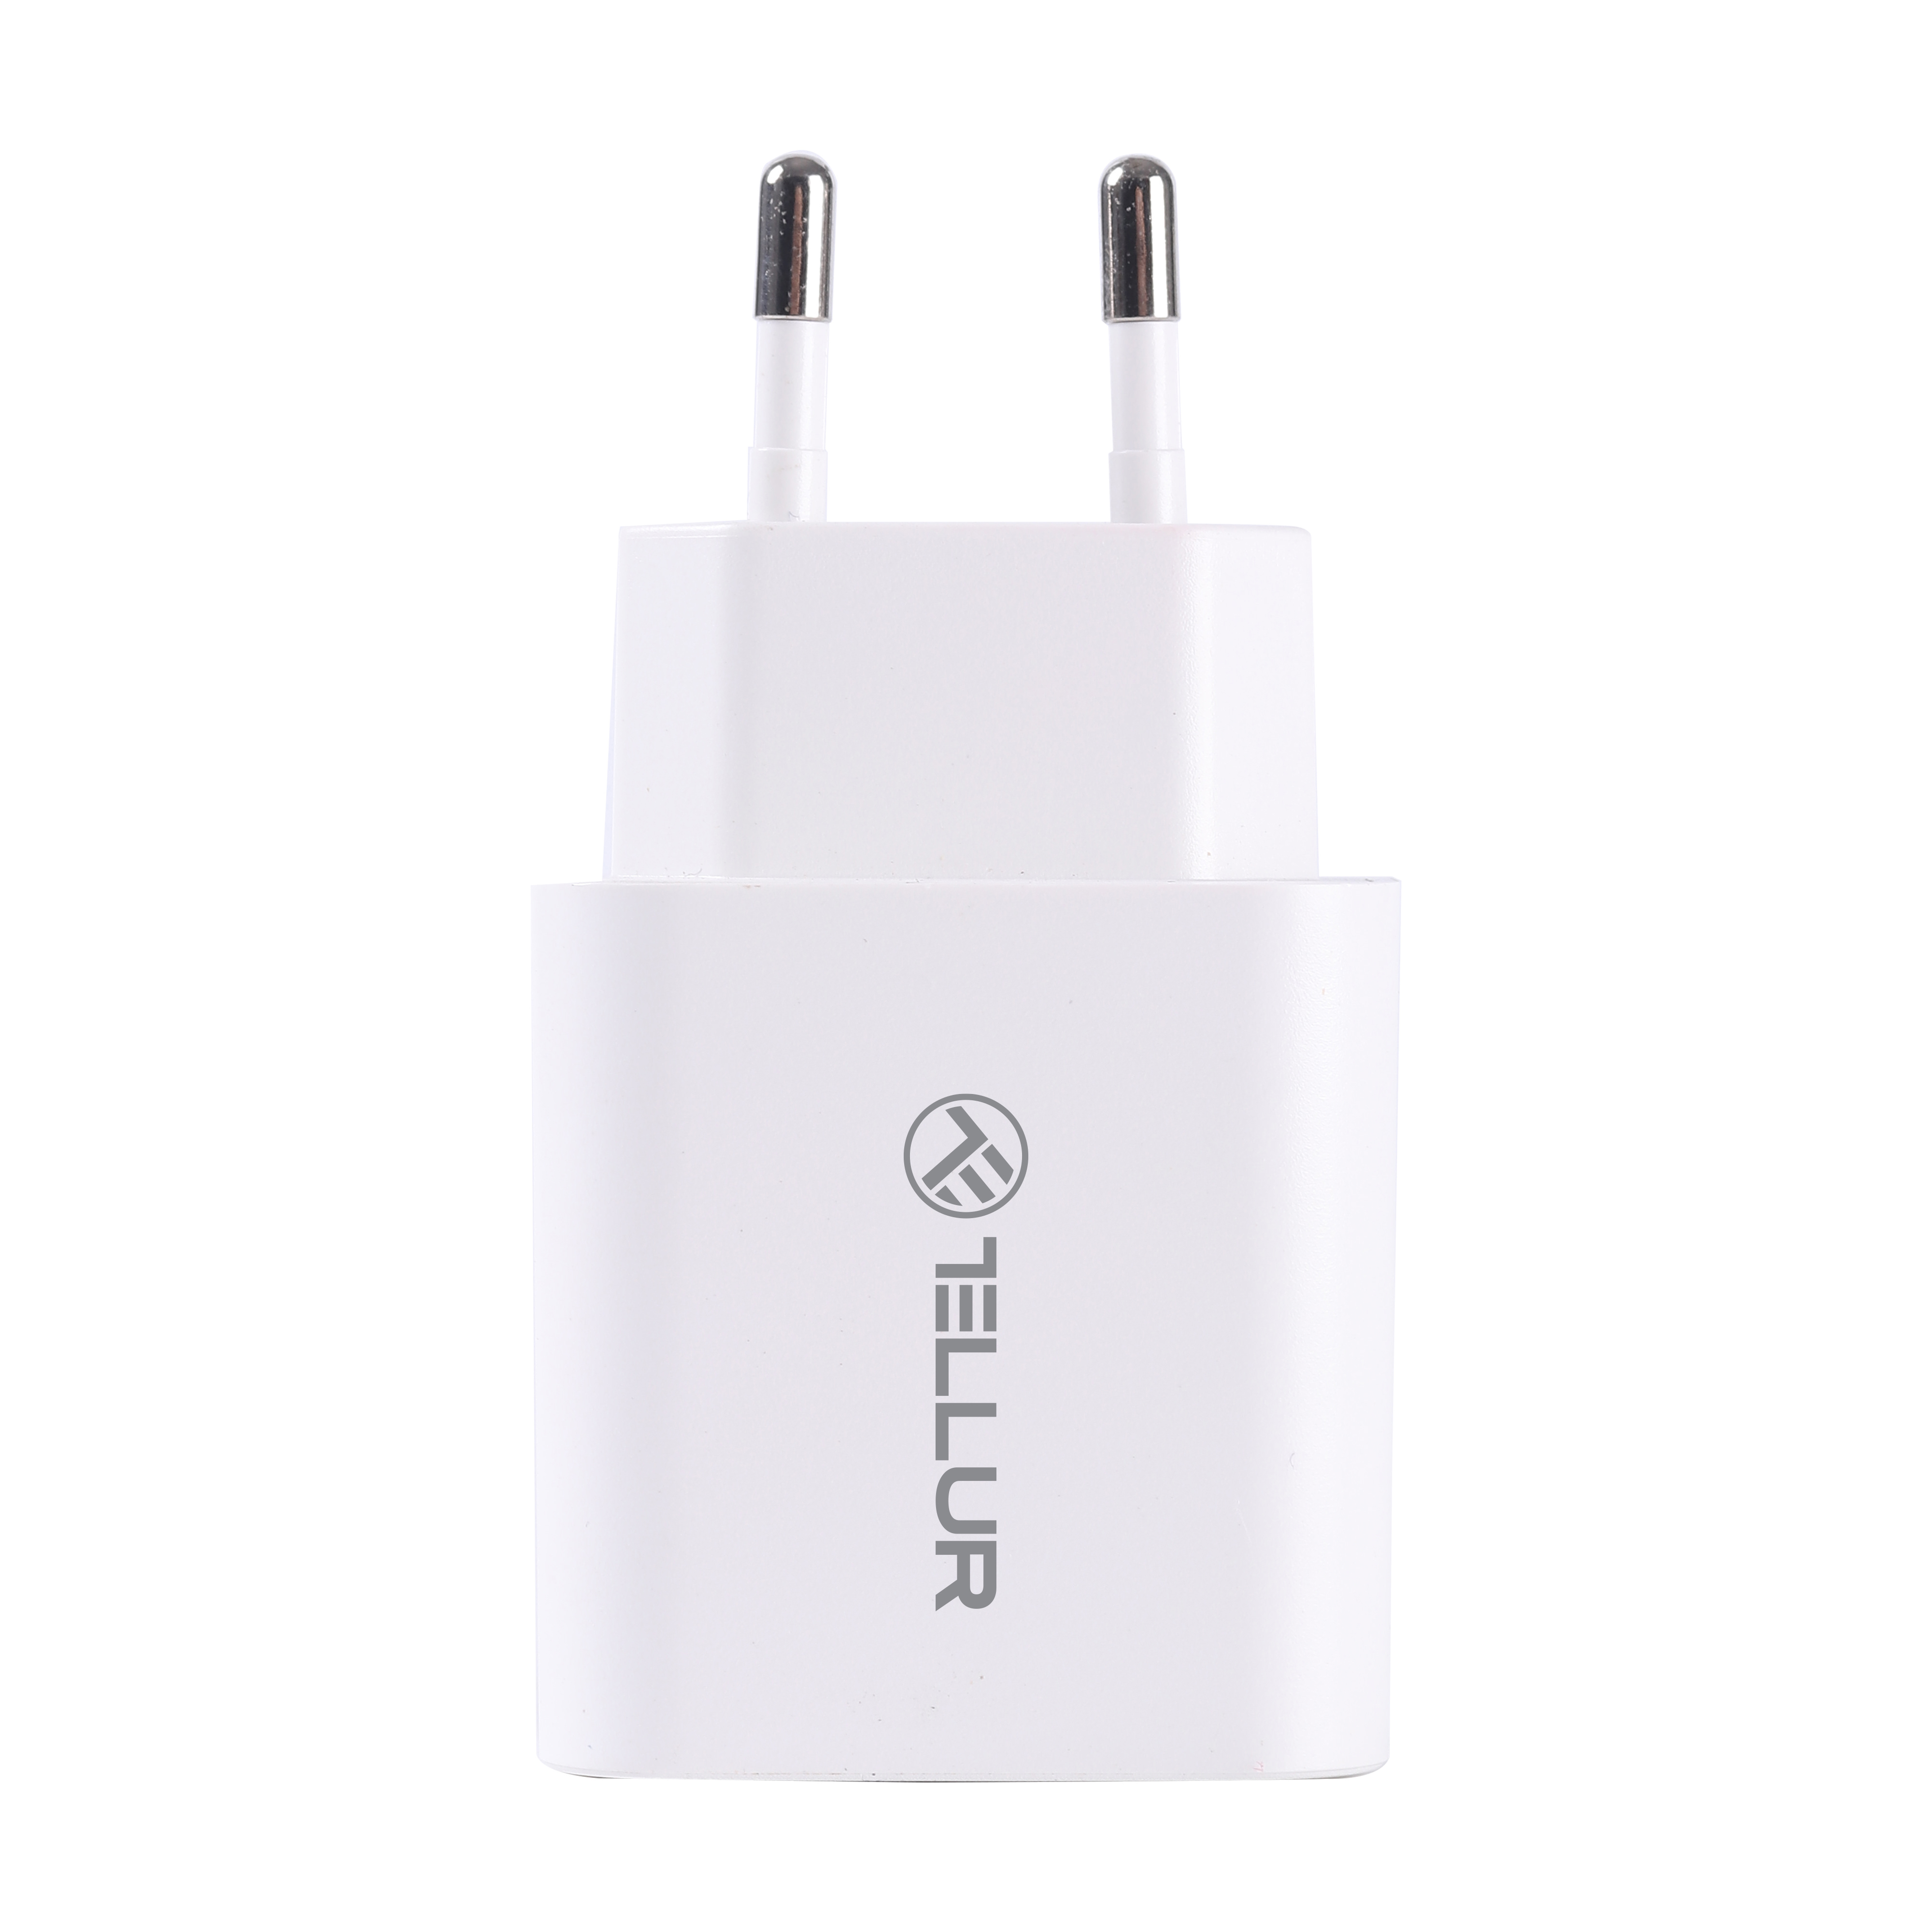 TELLUR PDHC101 Charger Apple, Samsung, Black Huawei